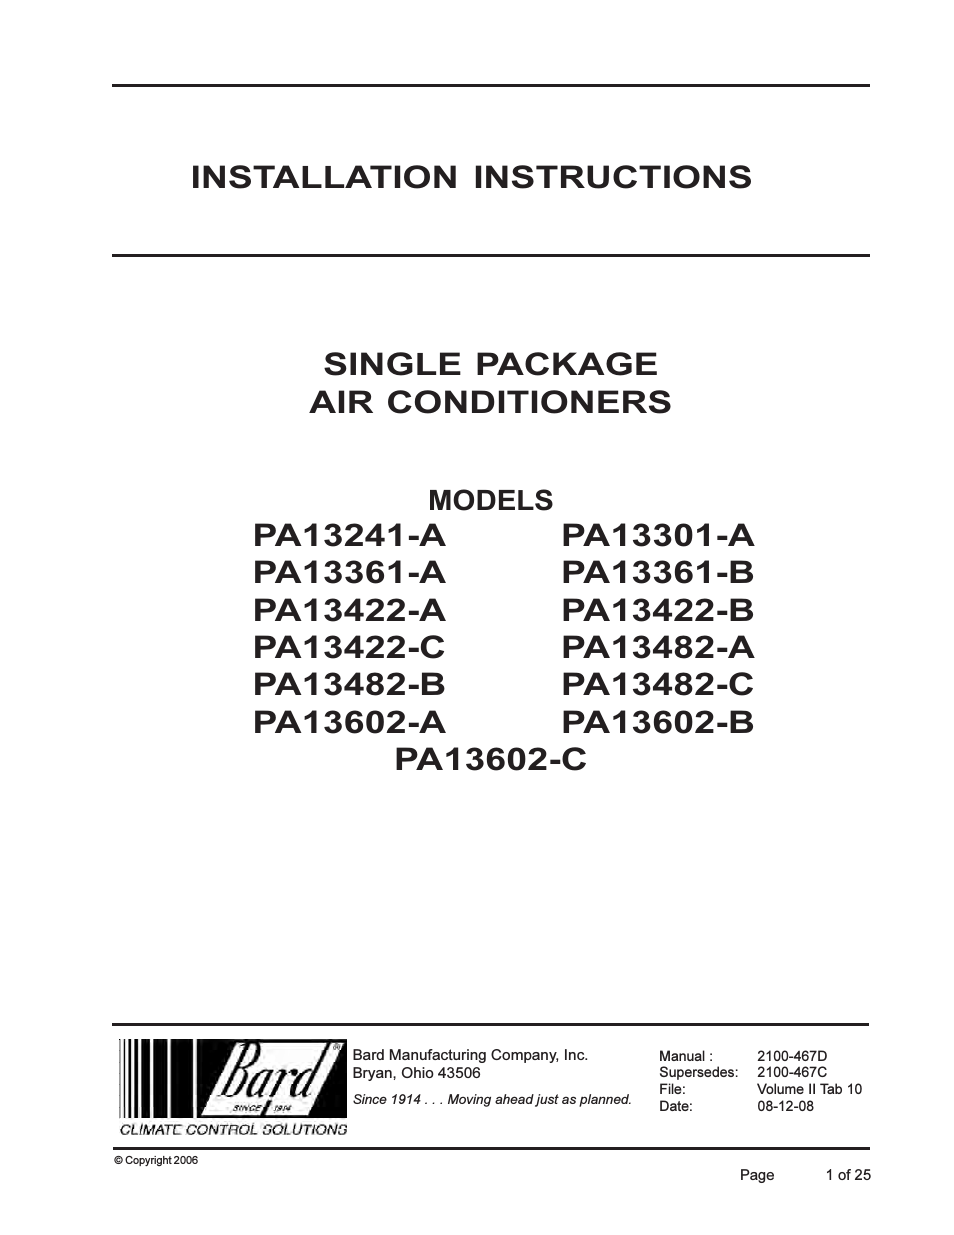 Single Package air Conditioners PA13241-A